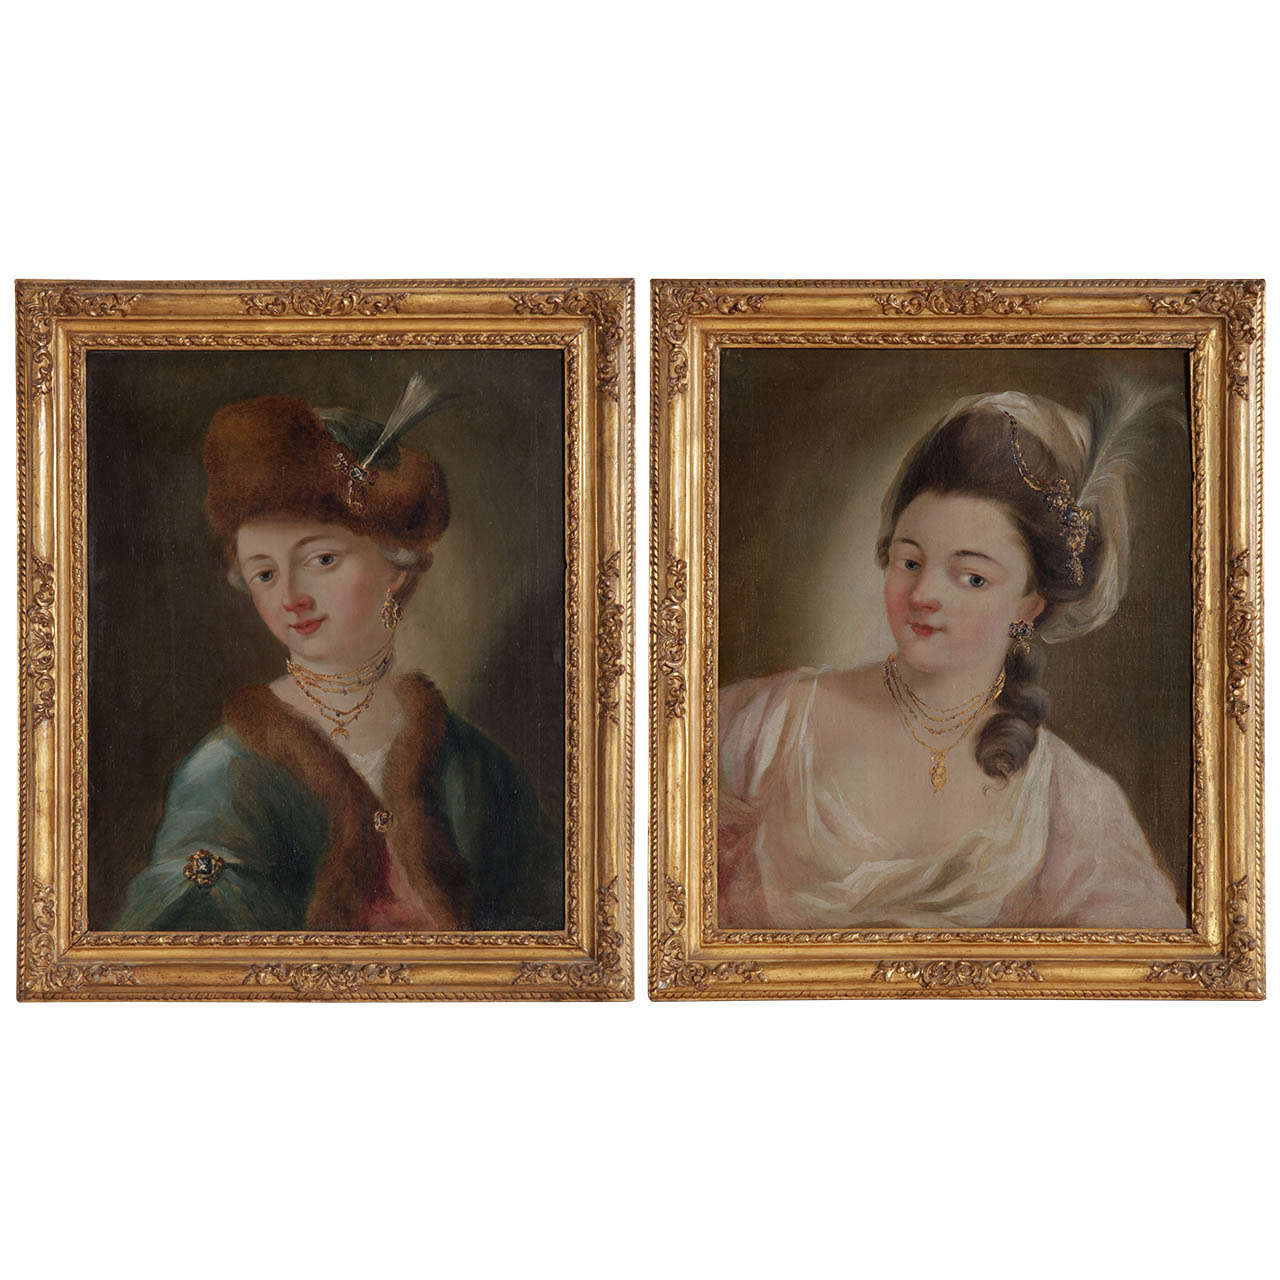 Pair of 18th Century Venetian Paintings Present a Young Ladies Portrait